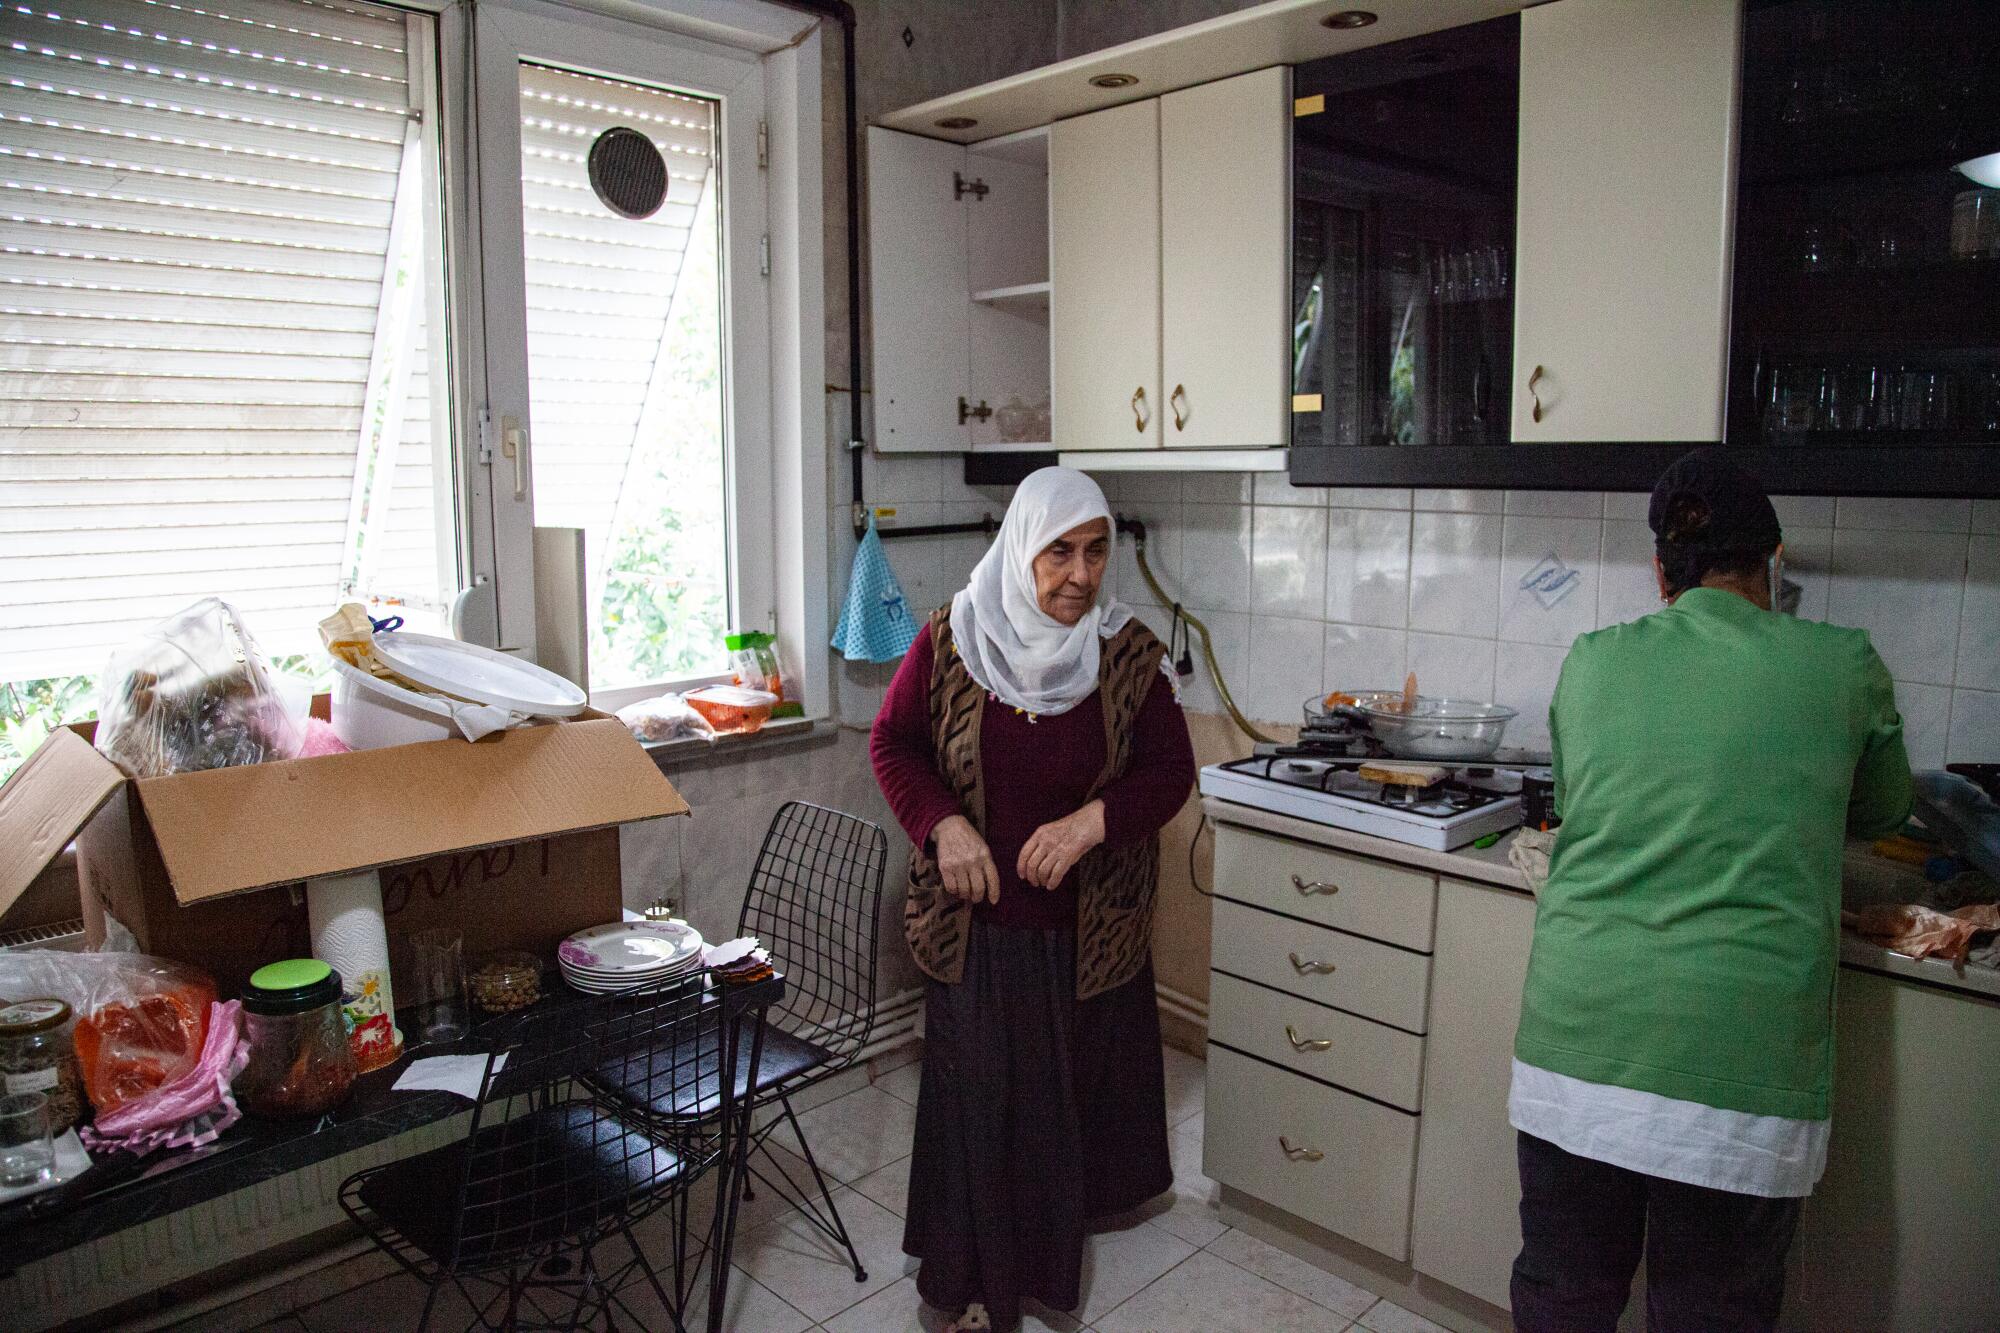 A woman in white headscarf stands in a kitchen with windows and white cabinets, with a box of belongings atop a table 